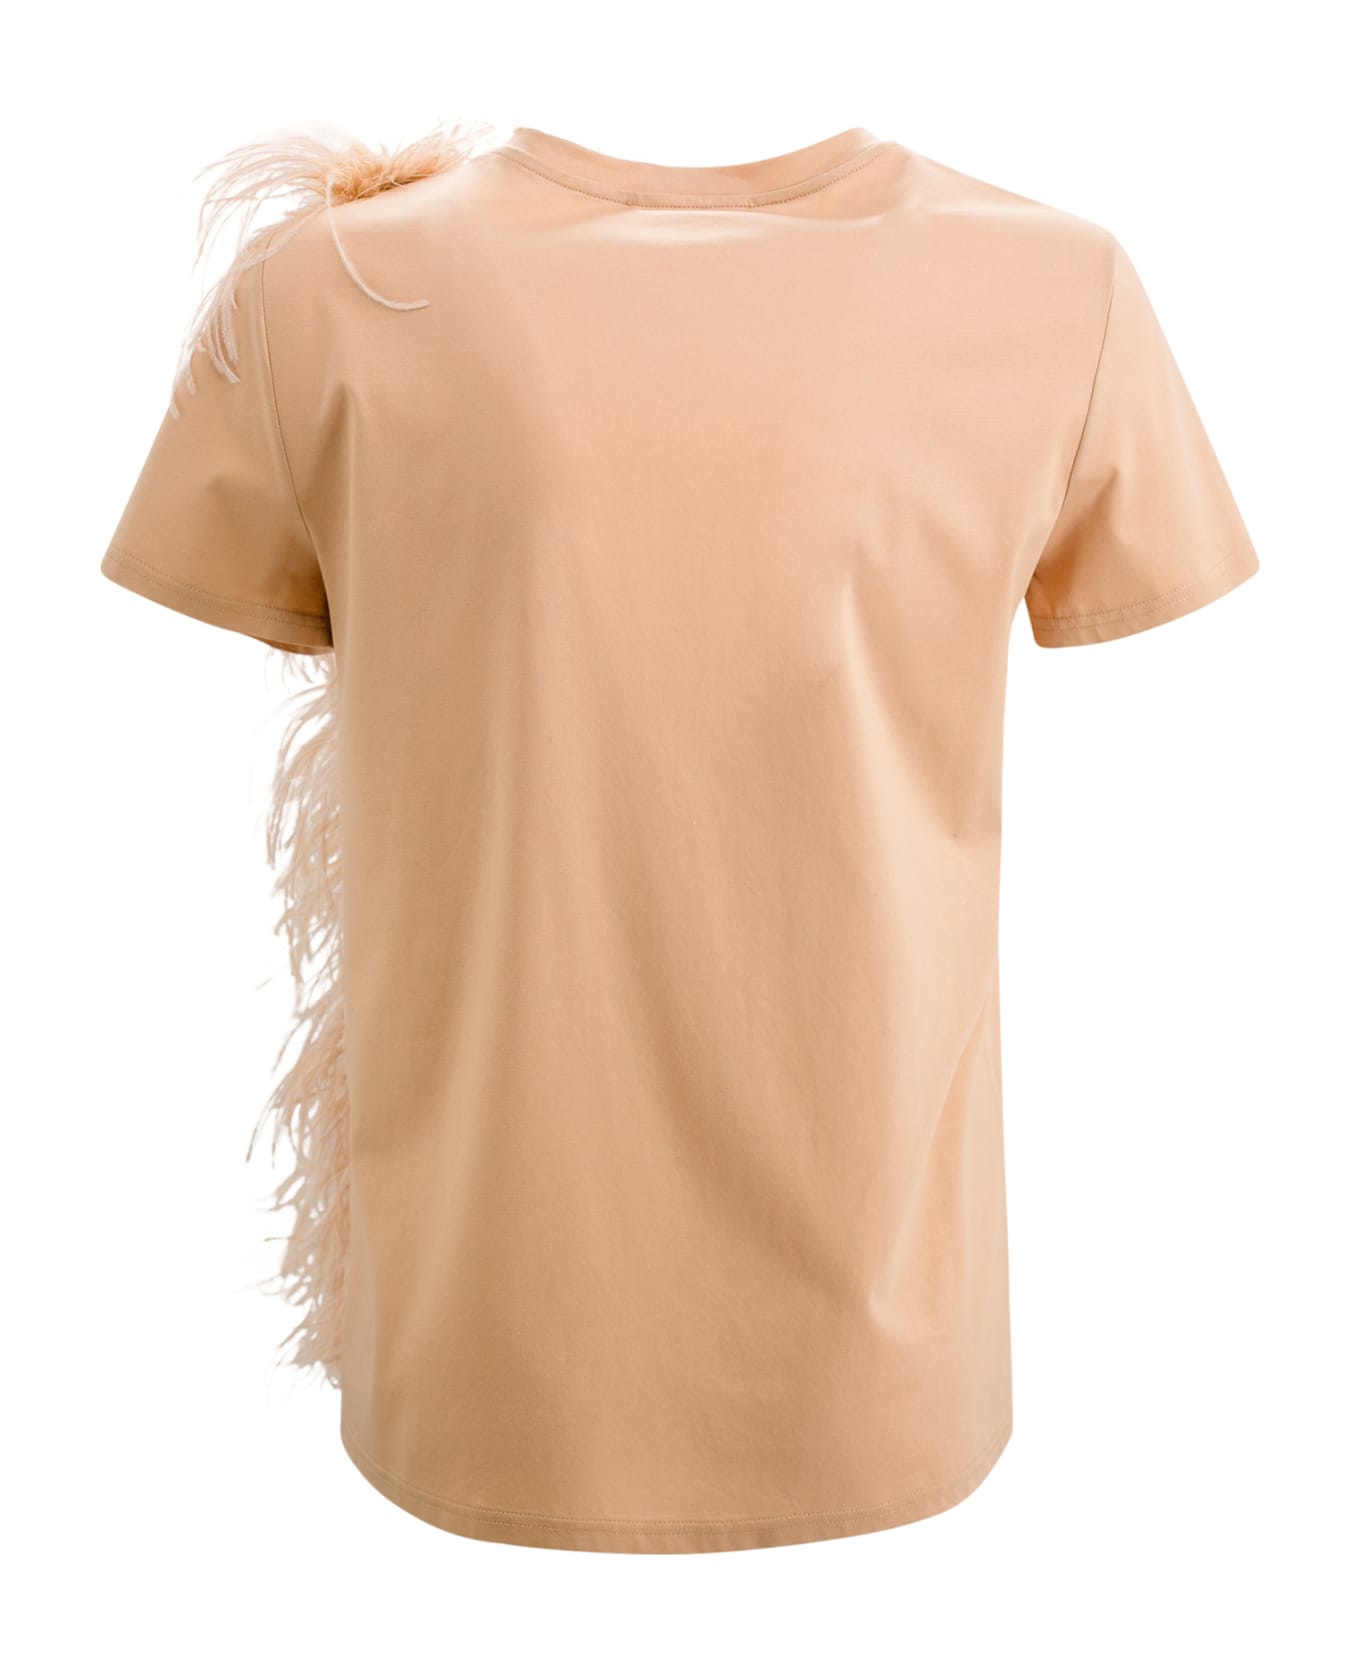 Max Mara Studio Jersey T-shirt With Feathers - Brown